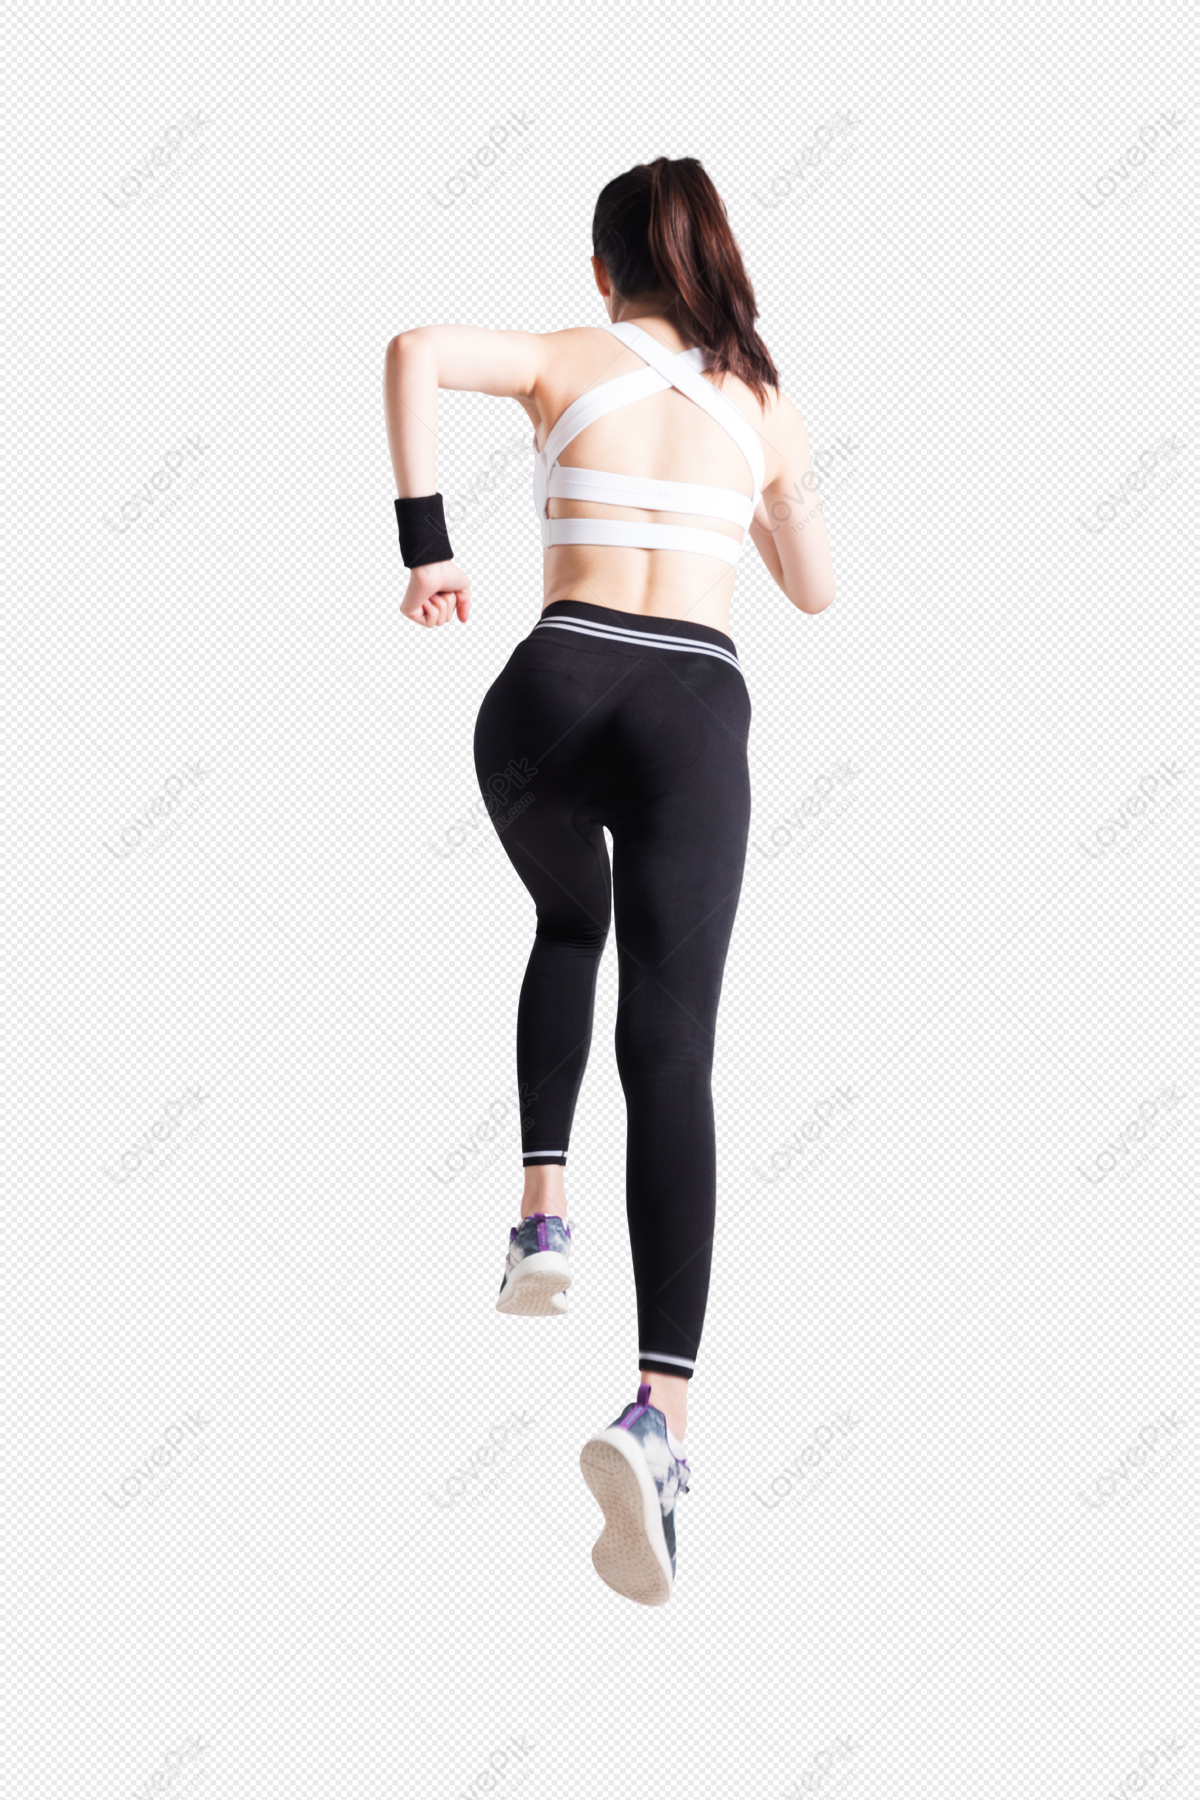 Running Woman PNG Images With Transparent Background